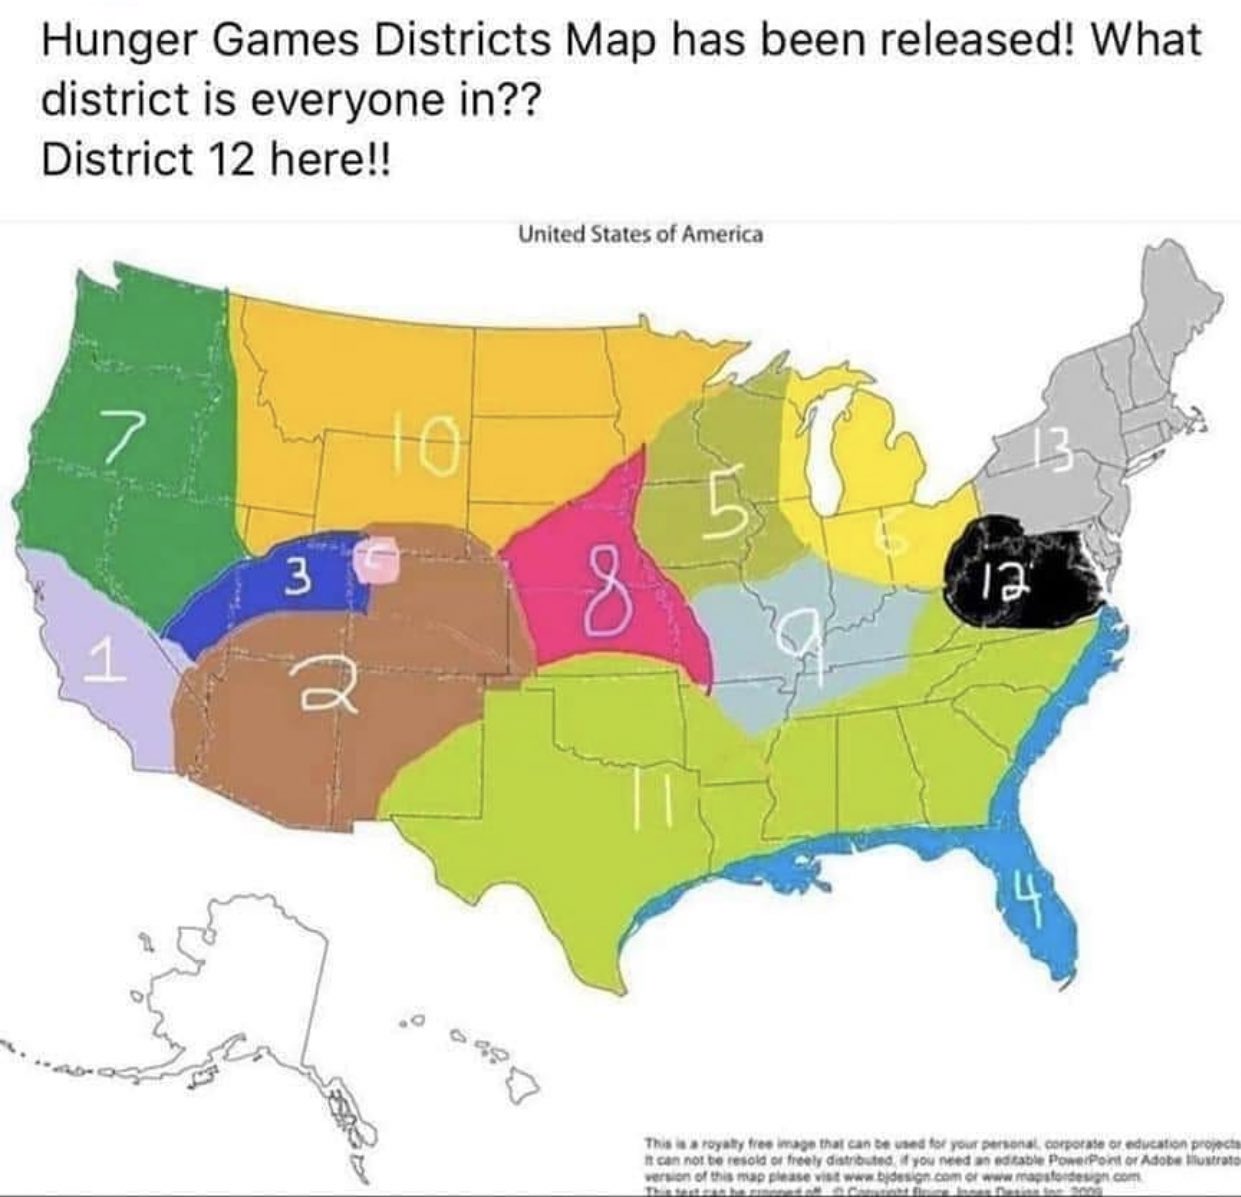 Someone Drew Up A 'Hunger Games' District Map Of The USA And It Looks ...